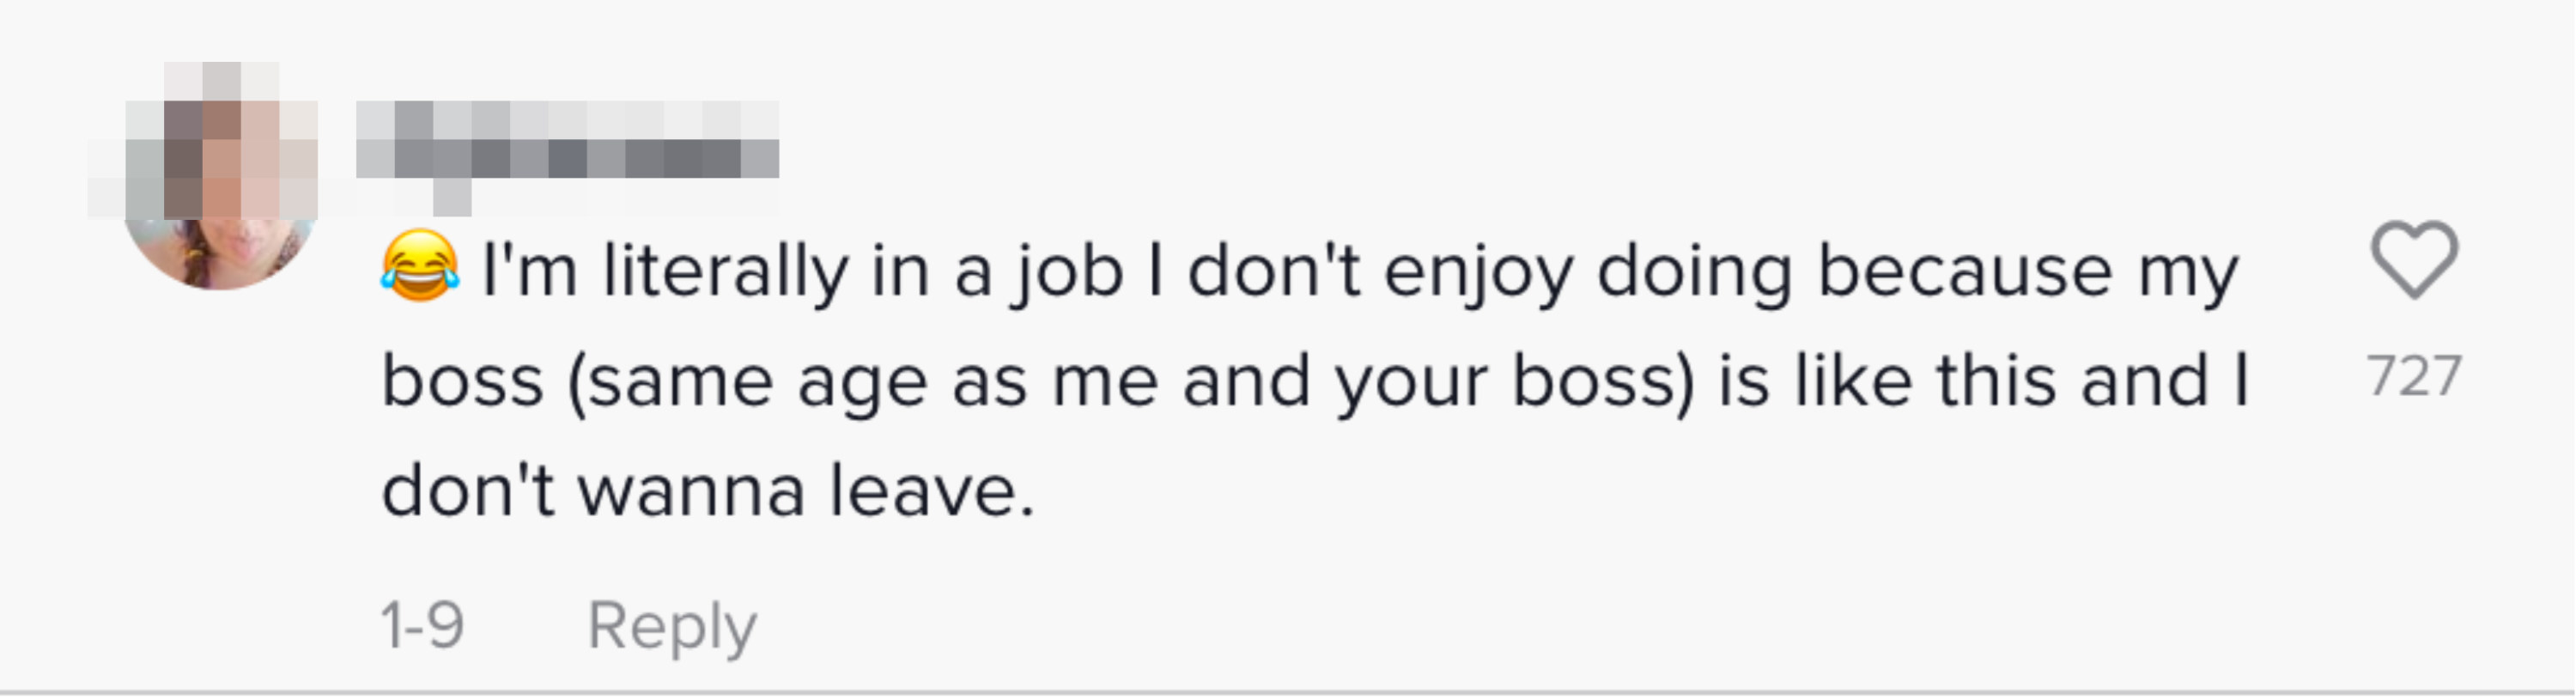 &quot; [laughing, crying emoji] I&#x27;m literally in a job I don&#x27;t enjoy doing because my boss (same age as me and your boss) is like this and I don&#x27;t wanna leave&quot;